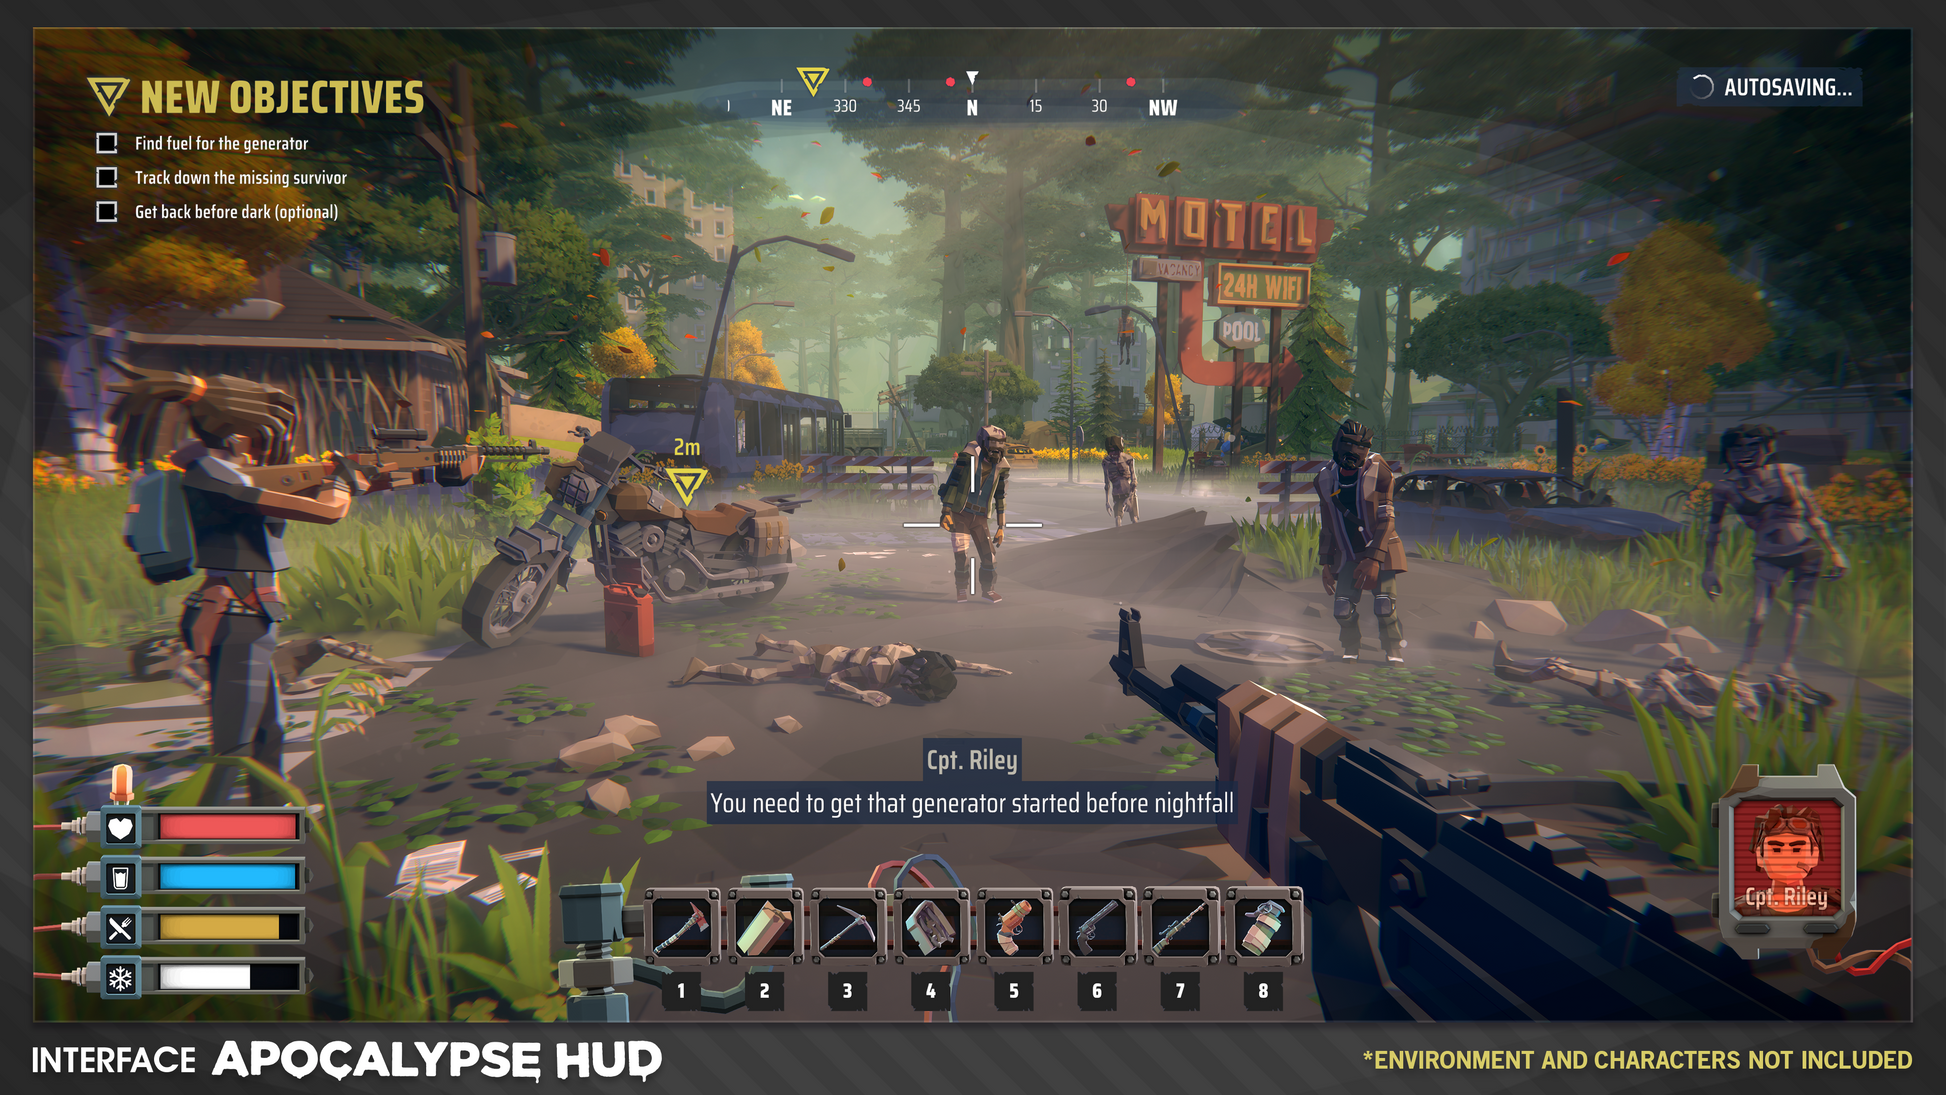 First person view of character and weapon pointing at a zombie in an abandoned camp while the game autosaves